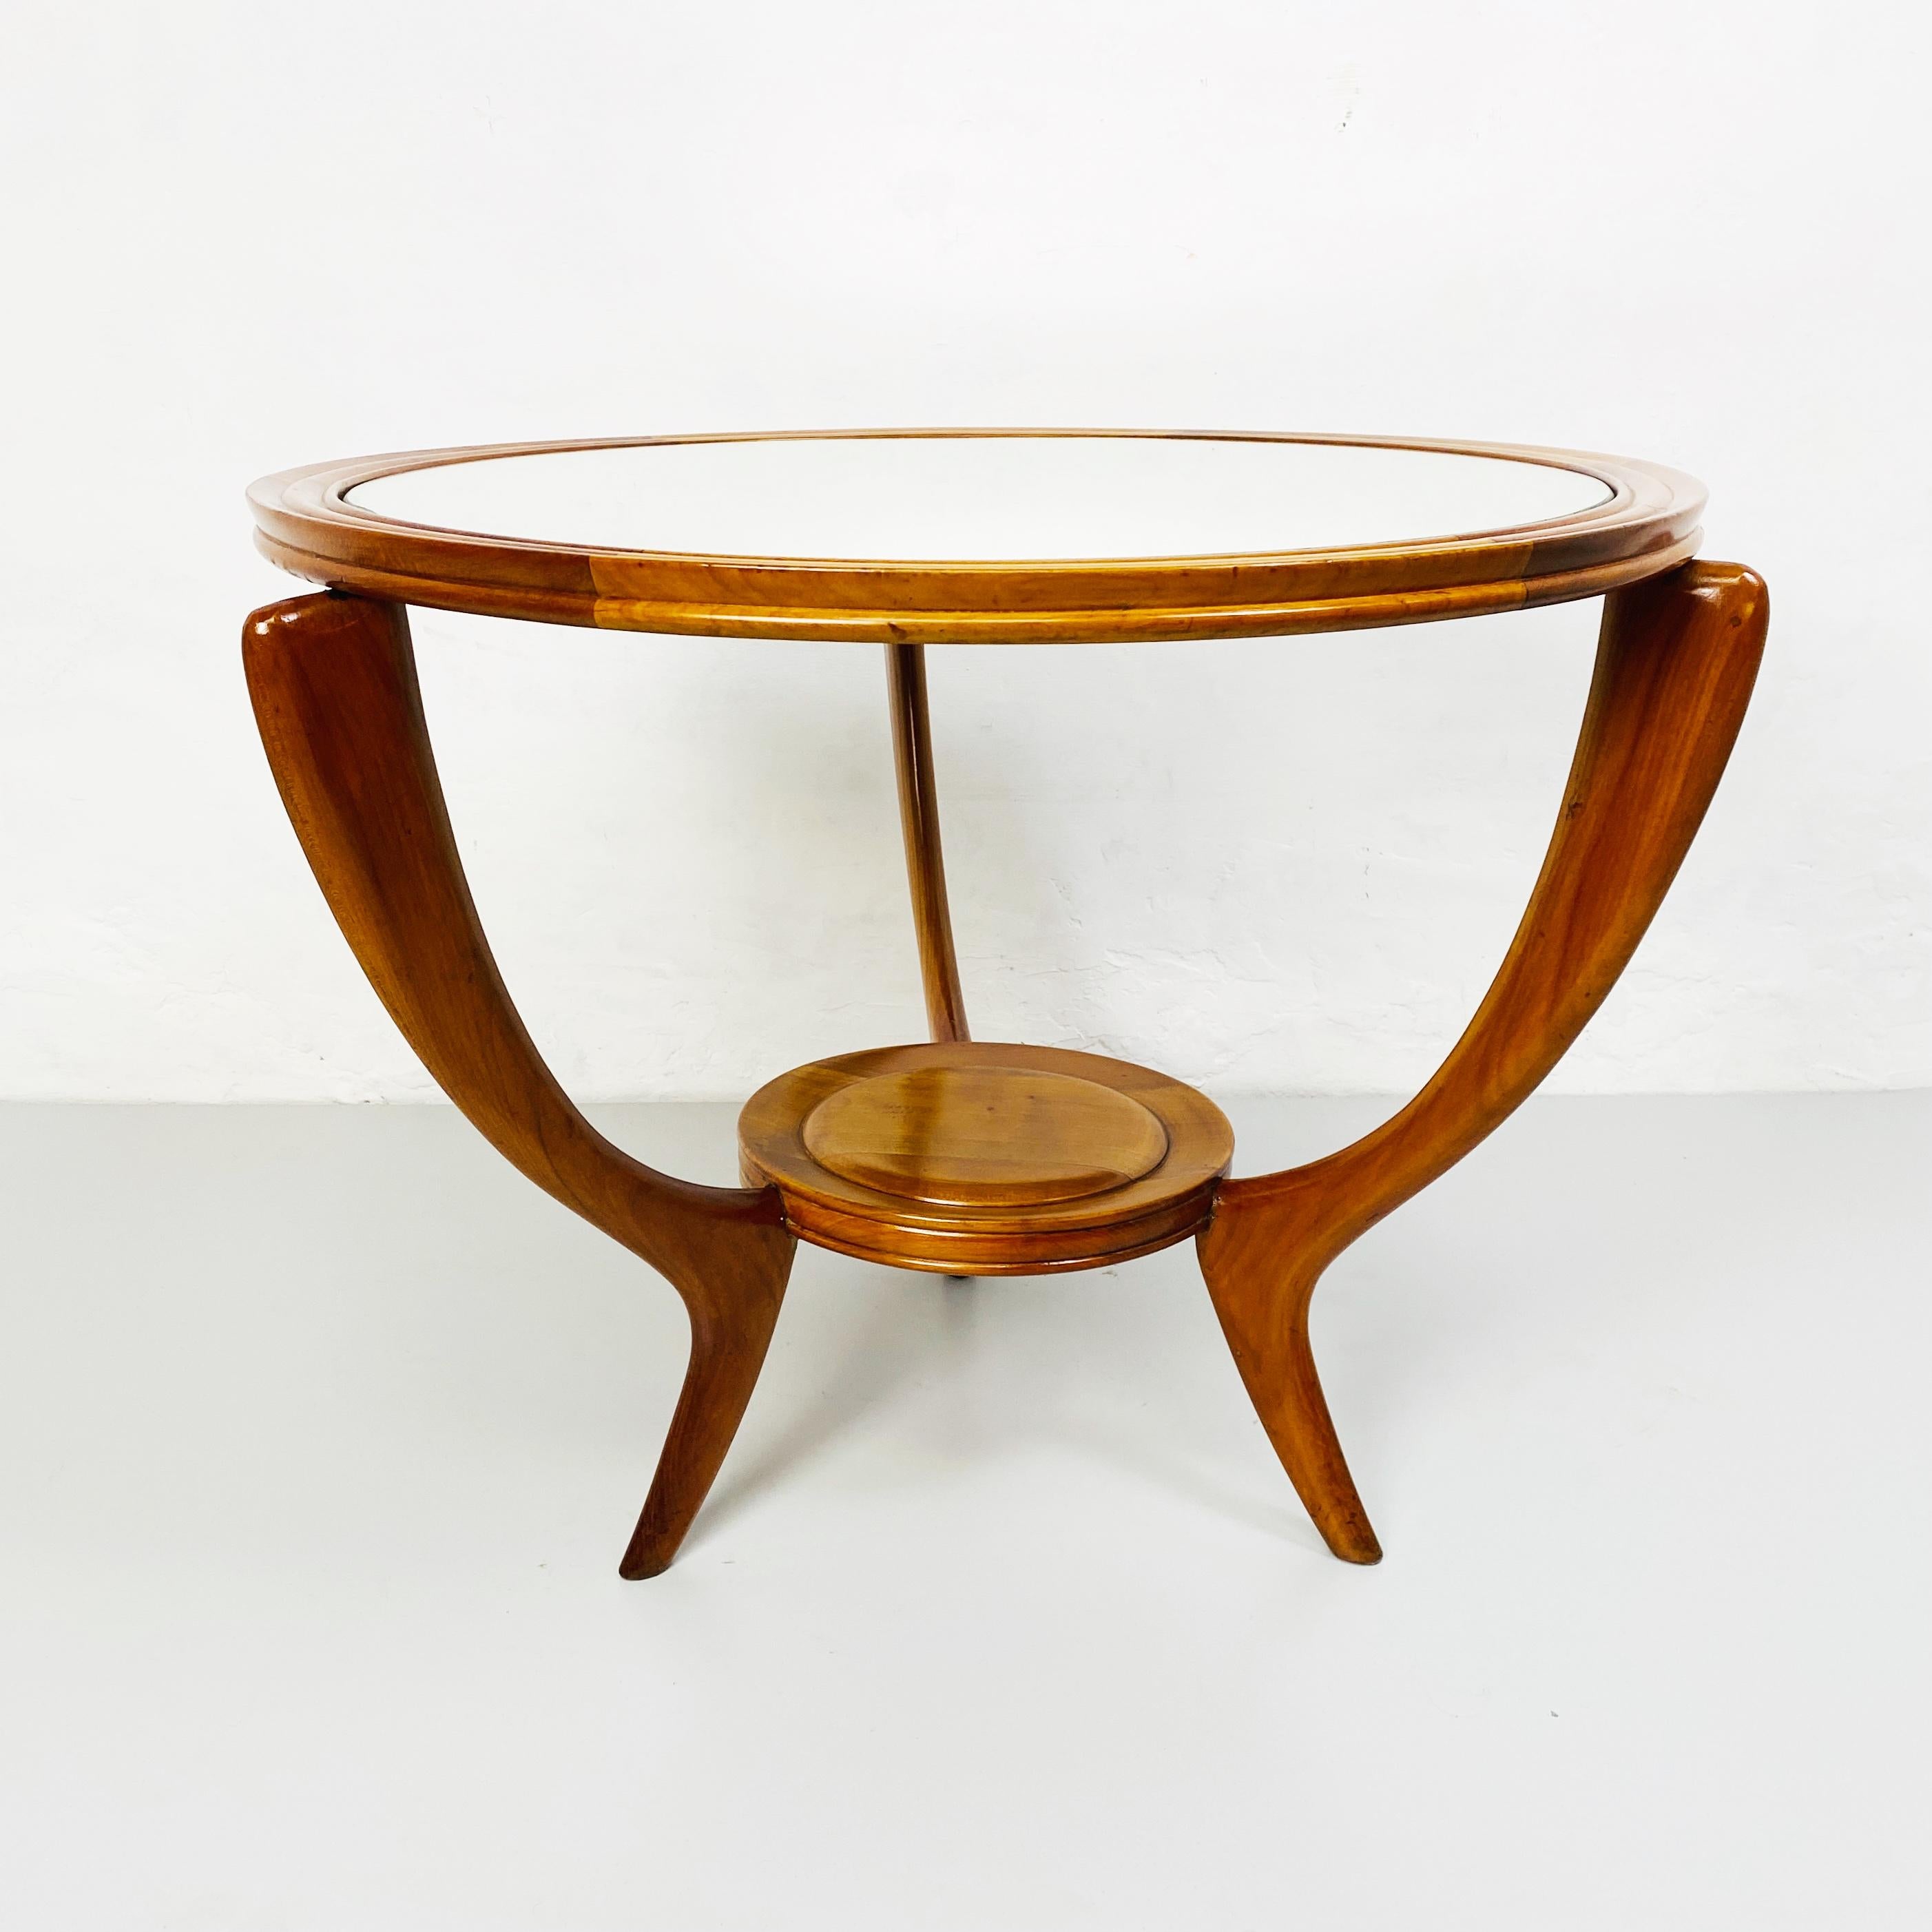 Italian Mid-Century Wood Round Table with Mirror, 1950s For Sale 3